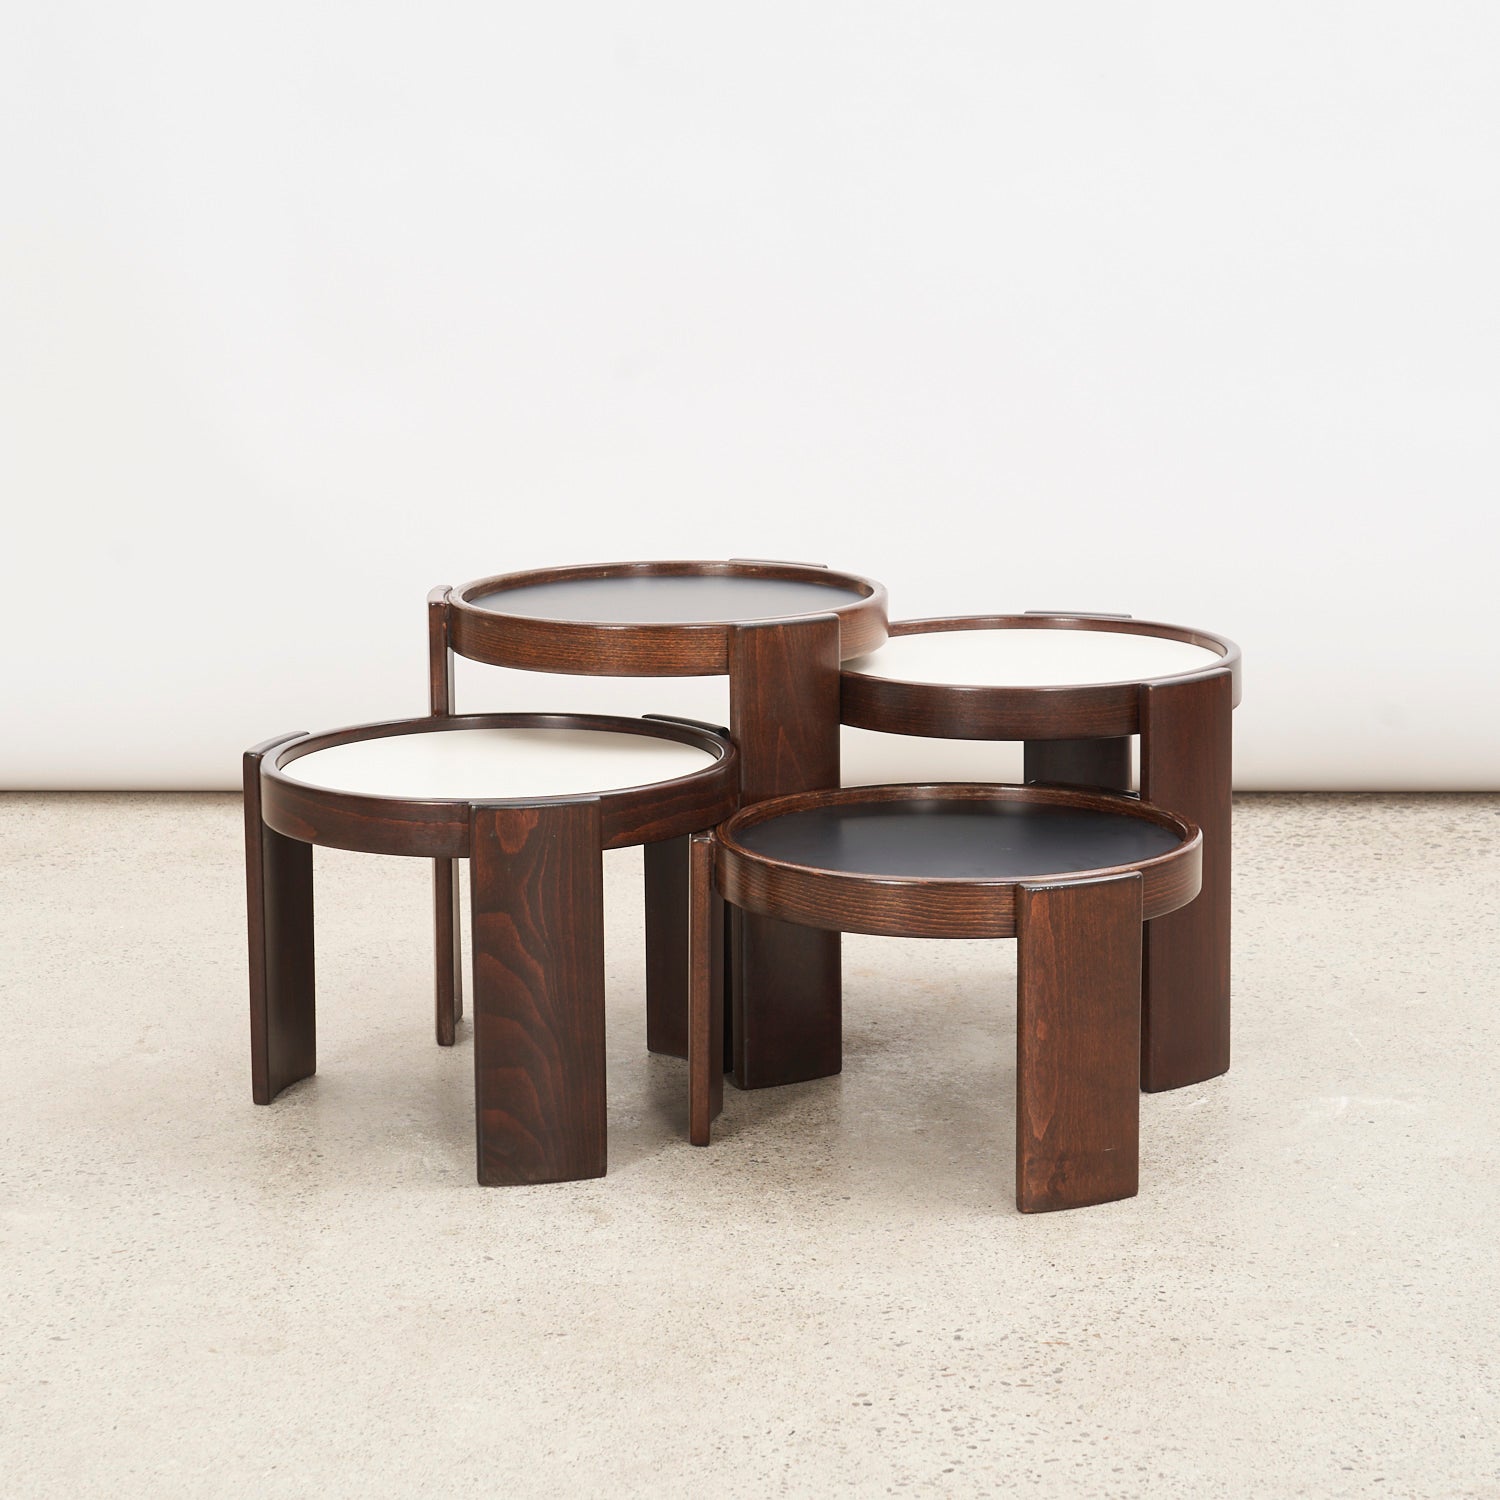 Set of 4 '780' Round Nesting Tables by Gianfranco Frattini for Cassina